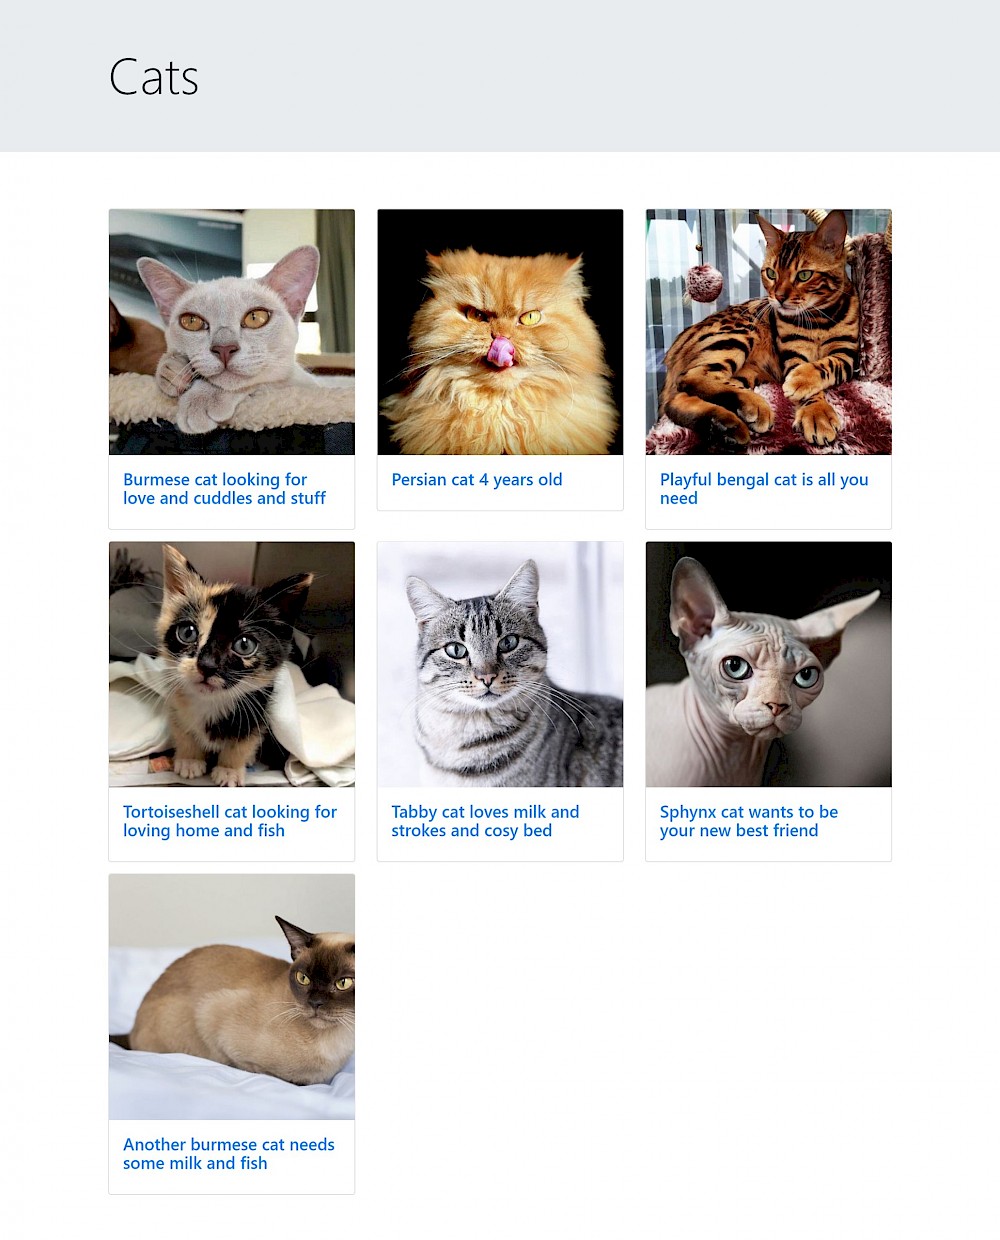 The rendered page at /cats/